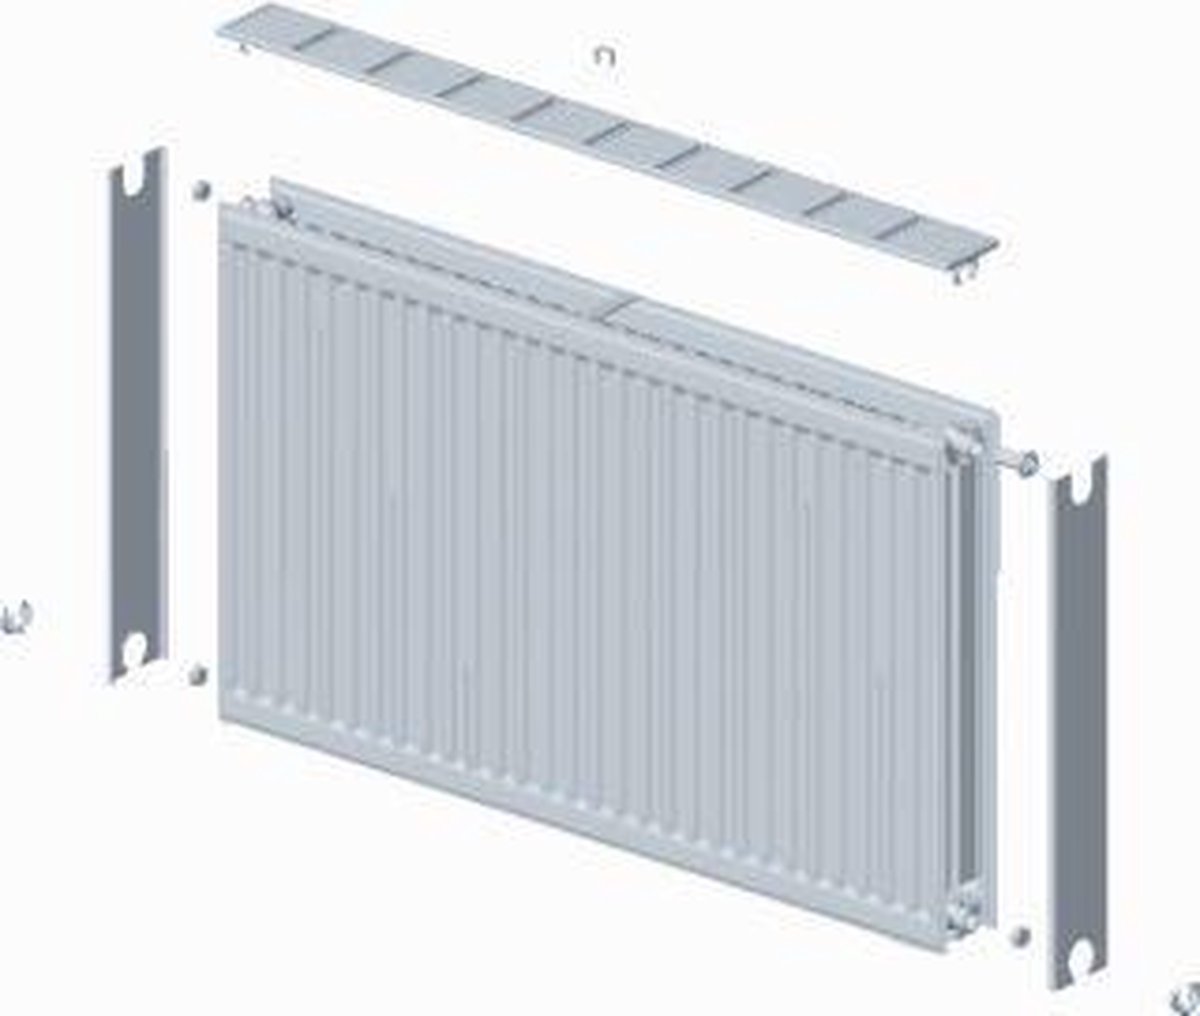 Stelrad paneelradiator Novello, staal, wit, (hxlxd) 400x2000x100mm, 22